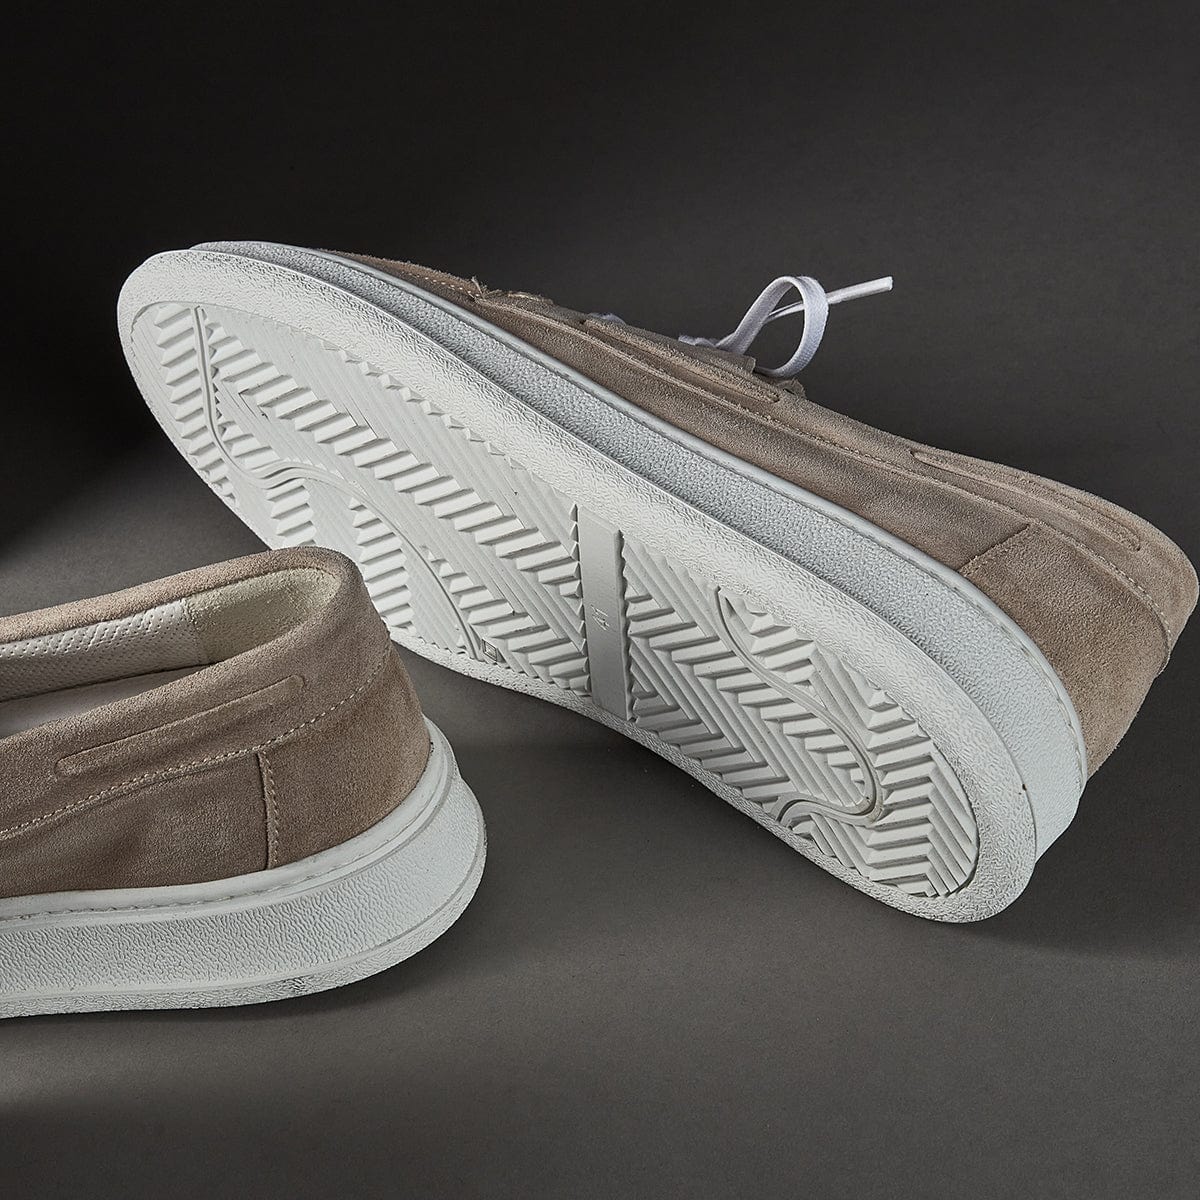 Conflict For Interest Boat Shoe Conflict For Interest Andrew Beige